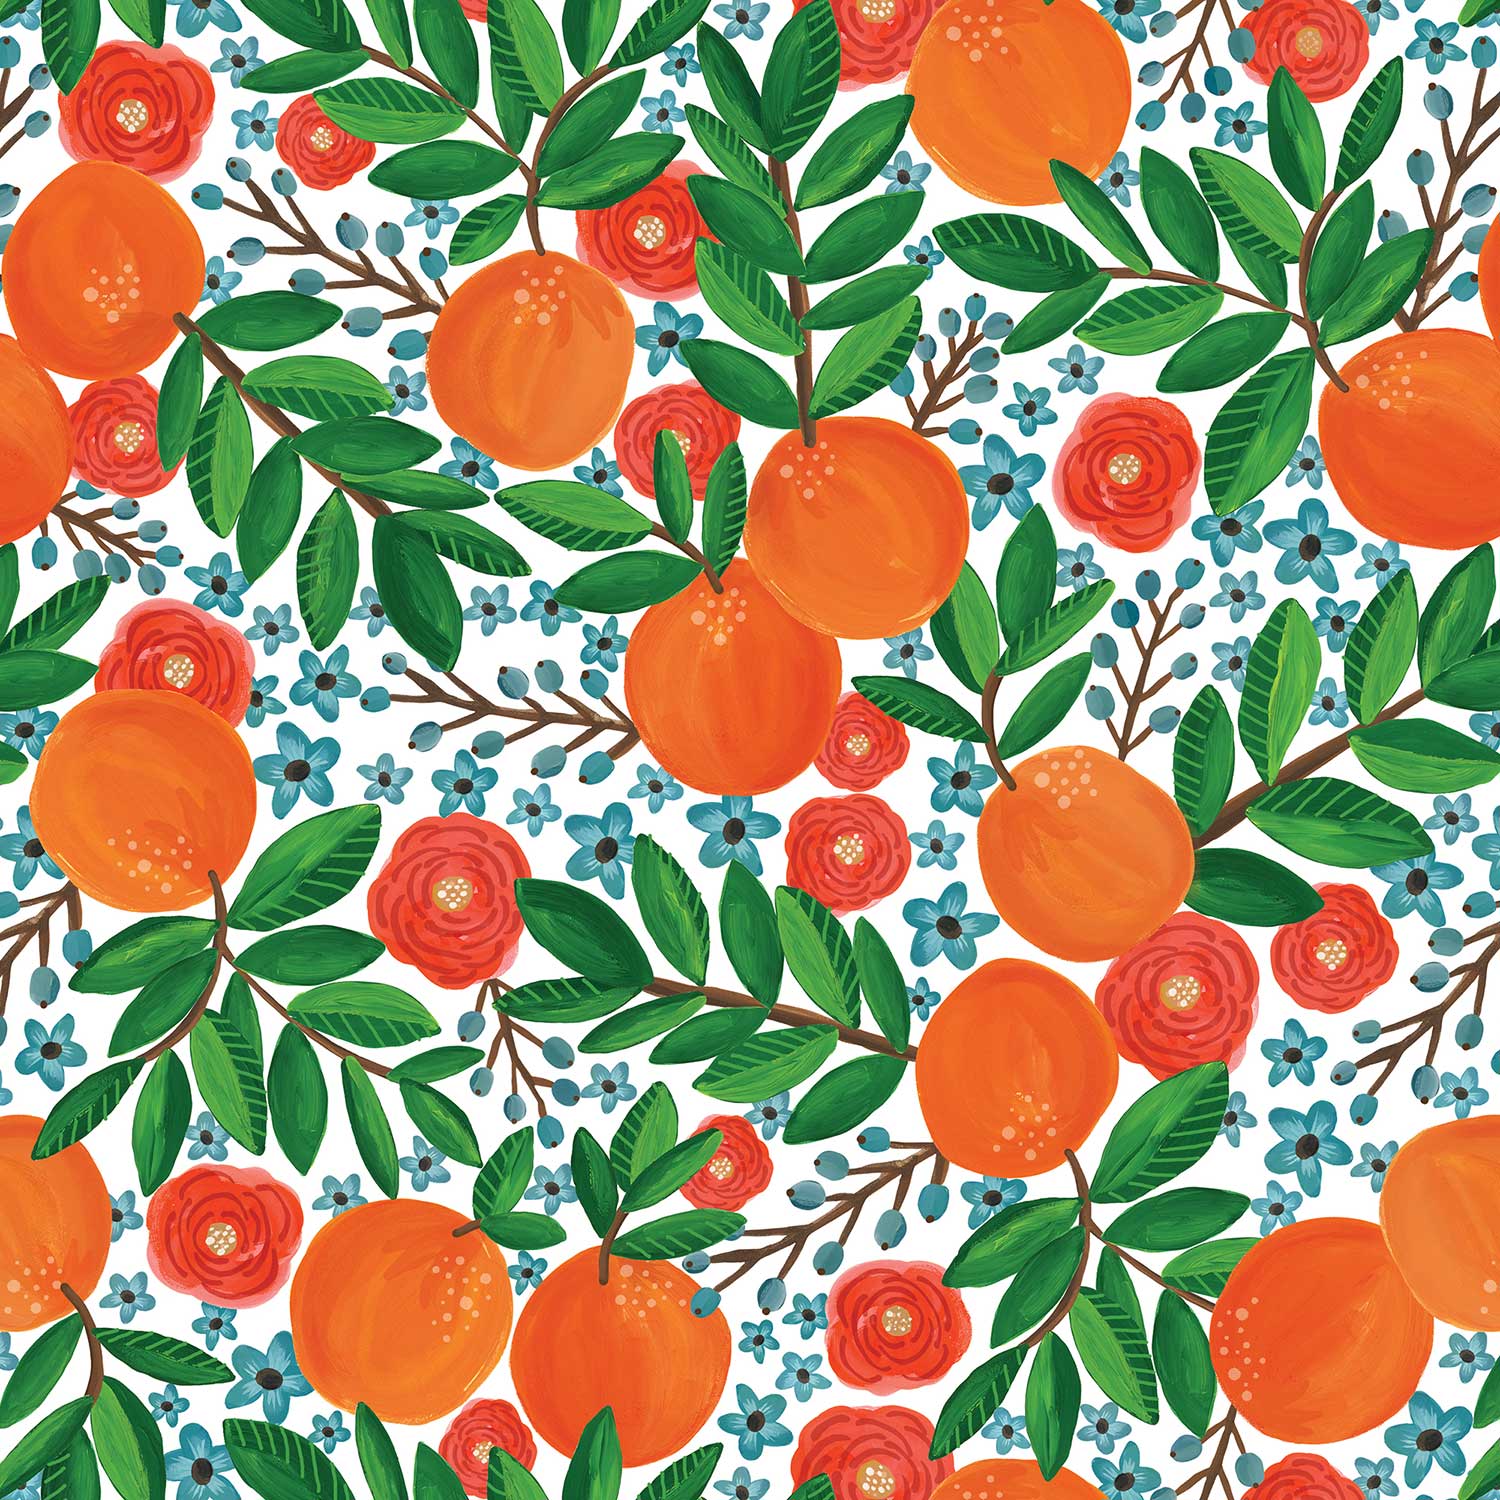 B257a Oranges Gift Wrapping Paper Swatch 